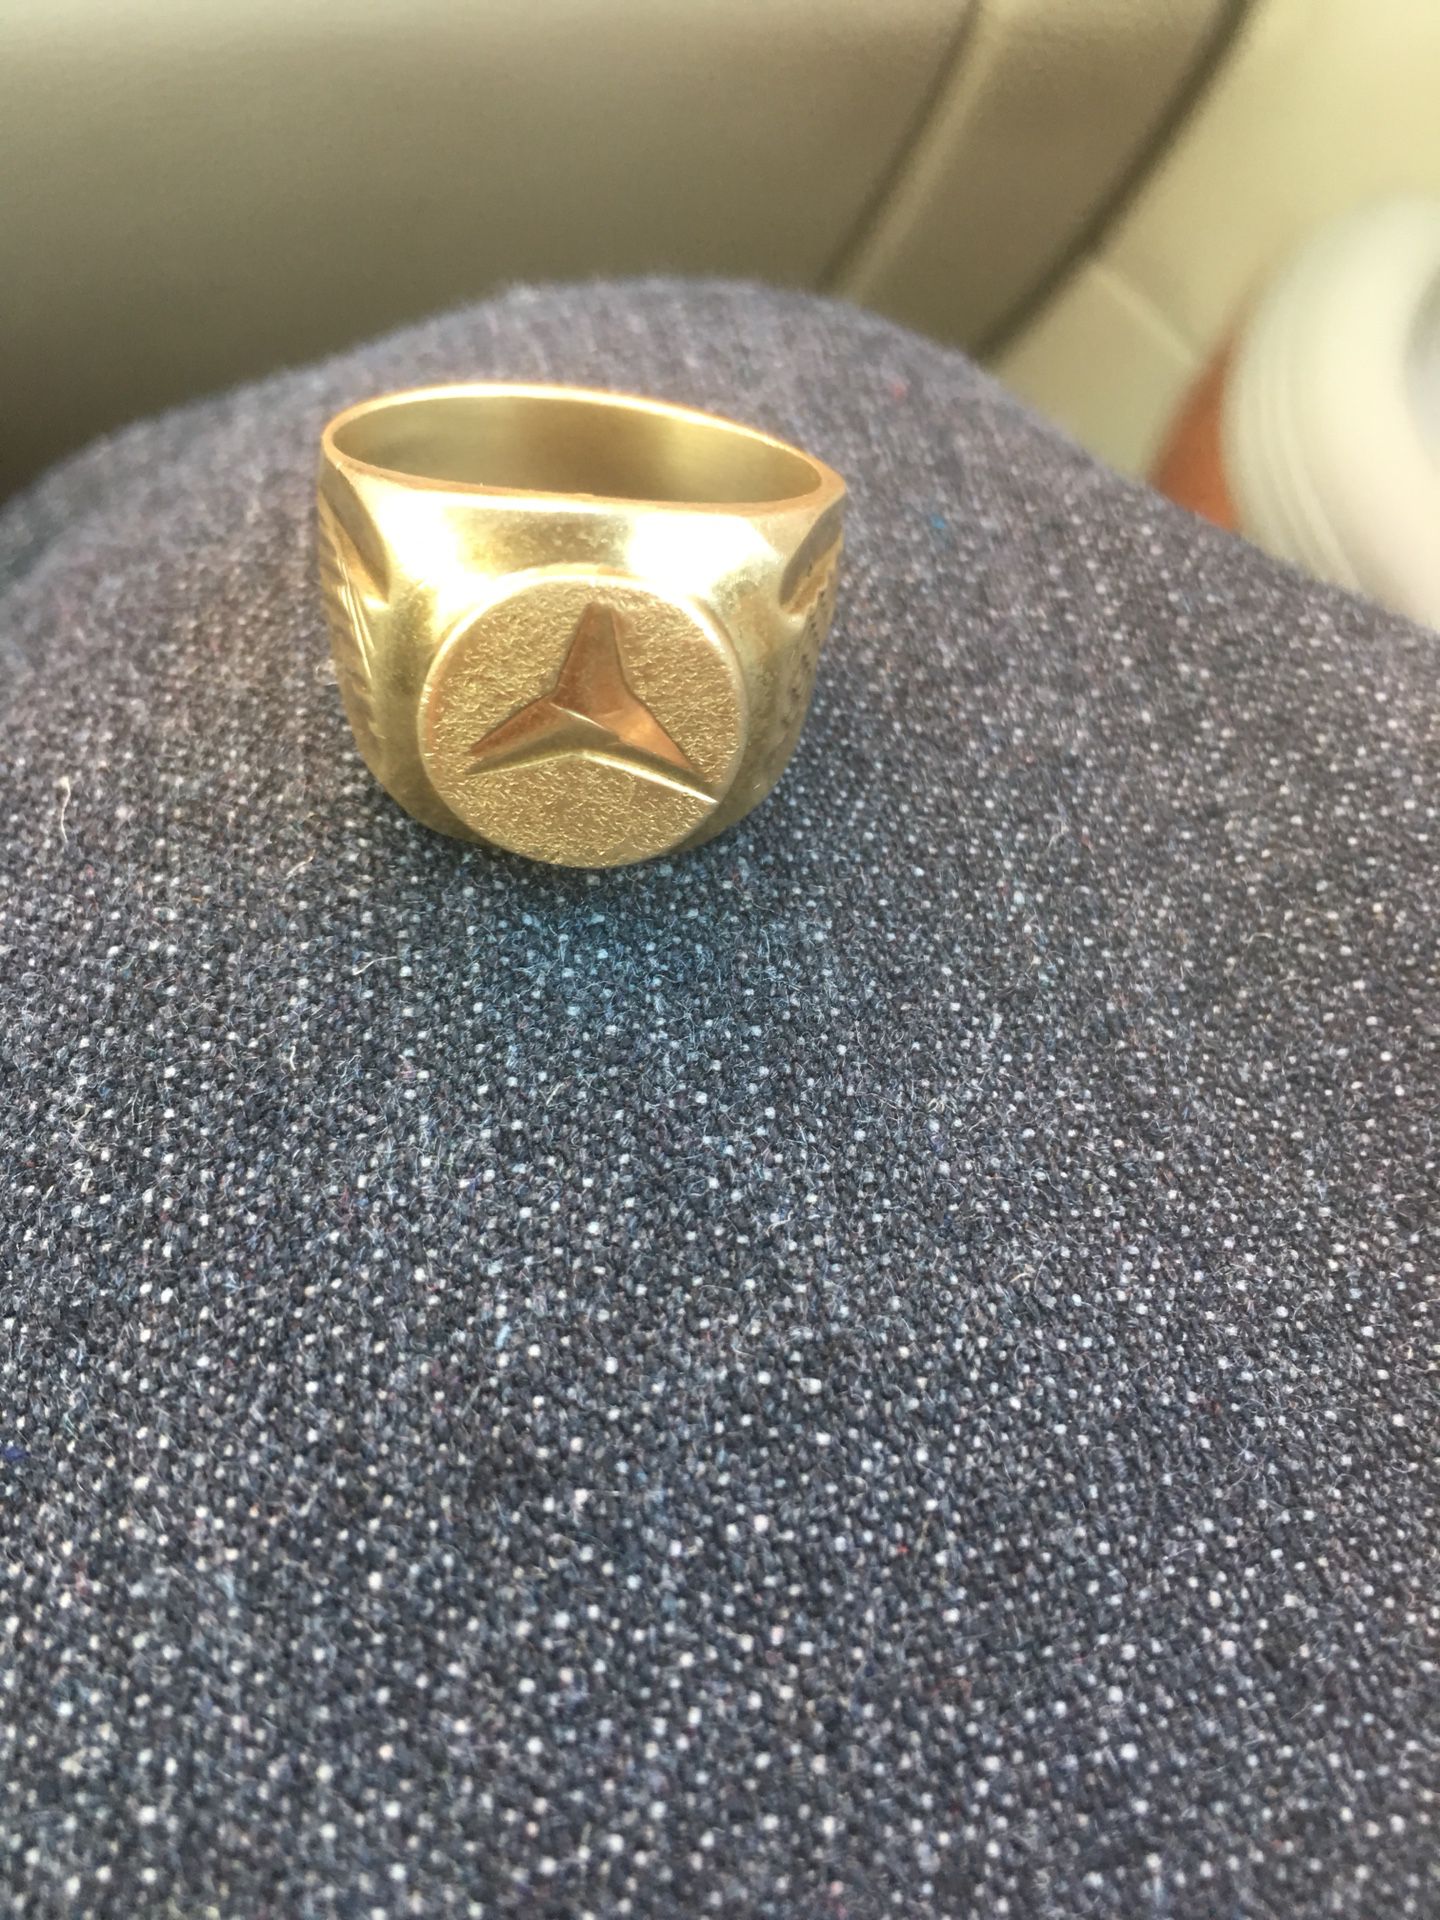 18k real solid gold ring